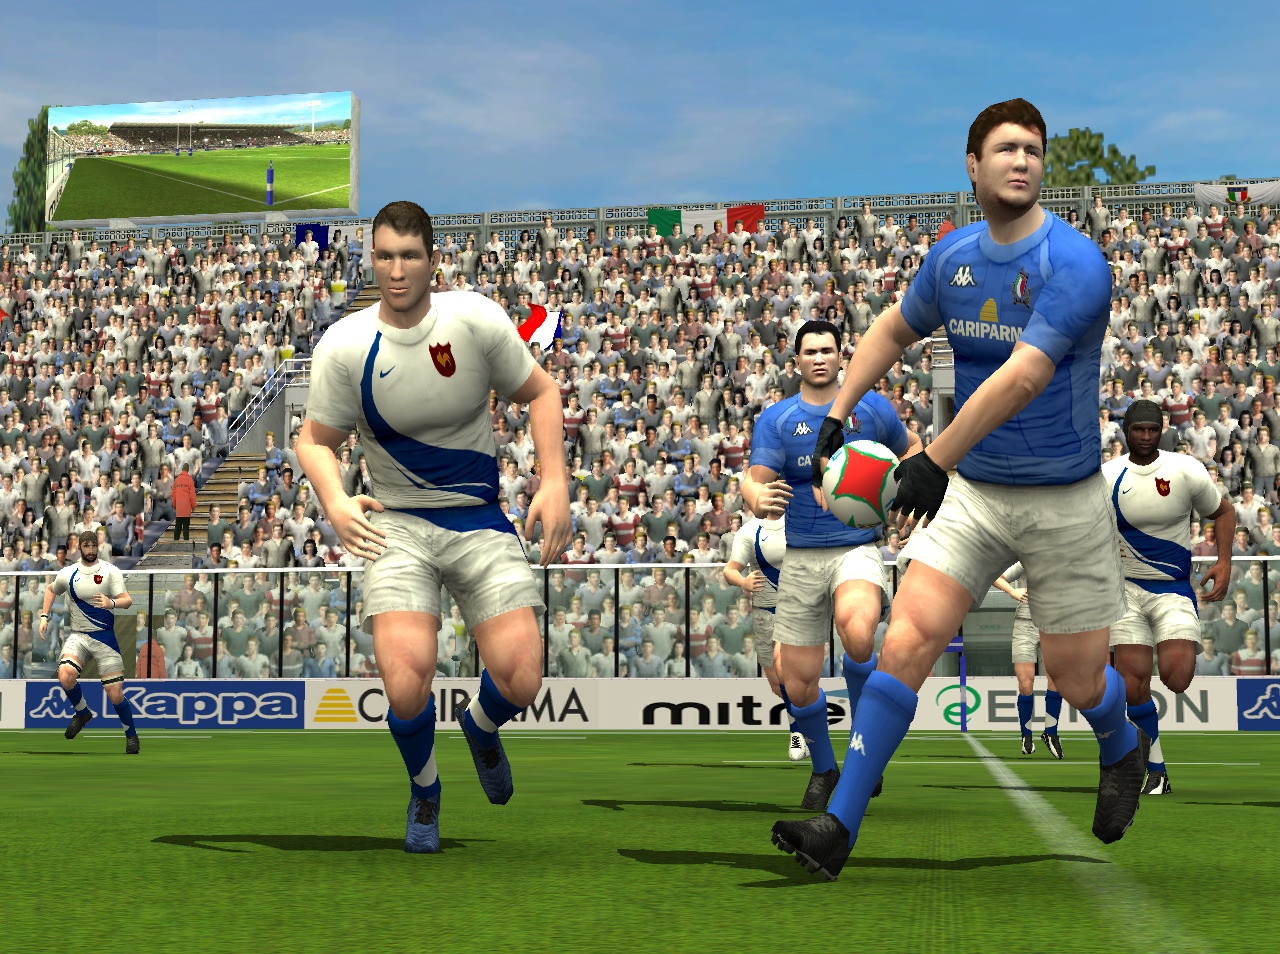 rugby 08 pc